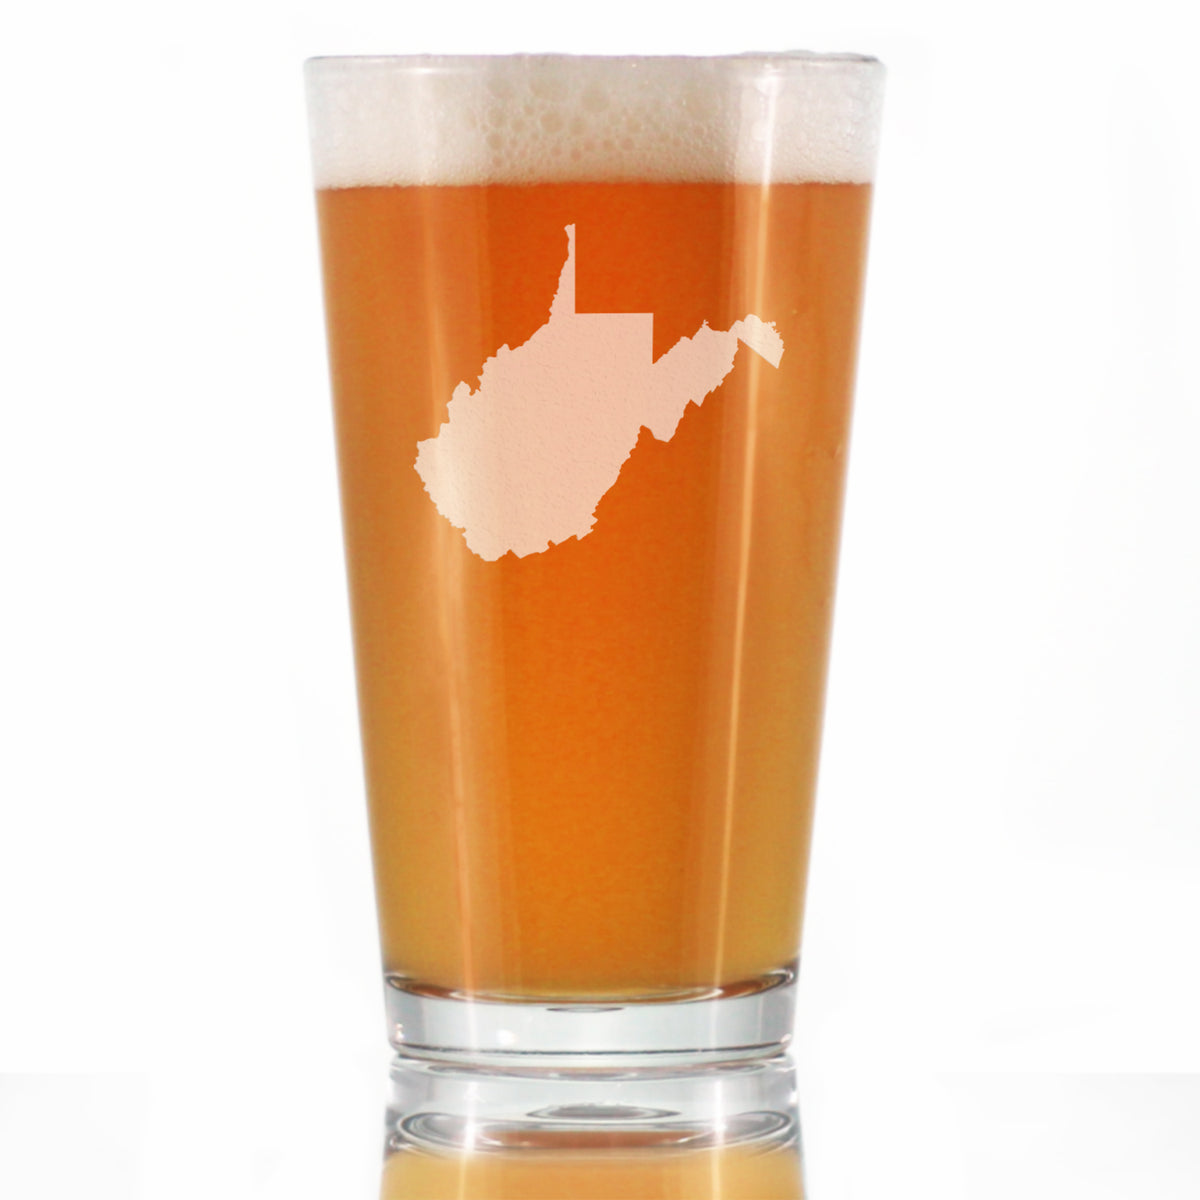 West Virginia State Outline Pint Glass for Beer - State Themed Drinking Decor and Gifts for West Virginian Women &amp; Men - 16 Oz Glasses